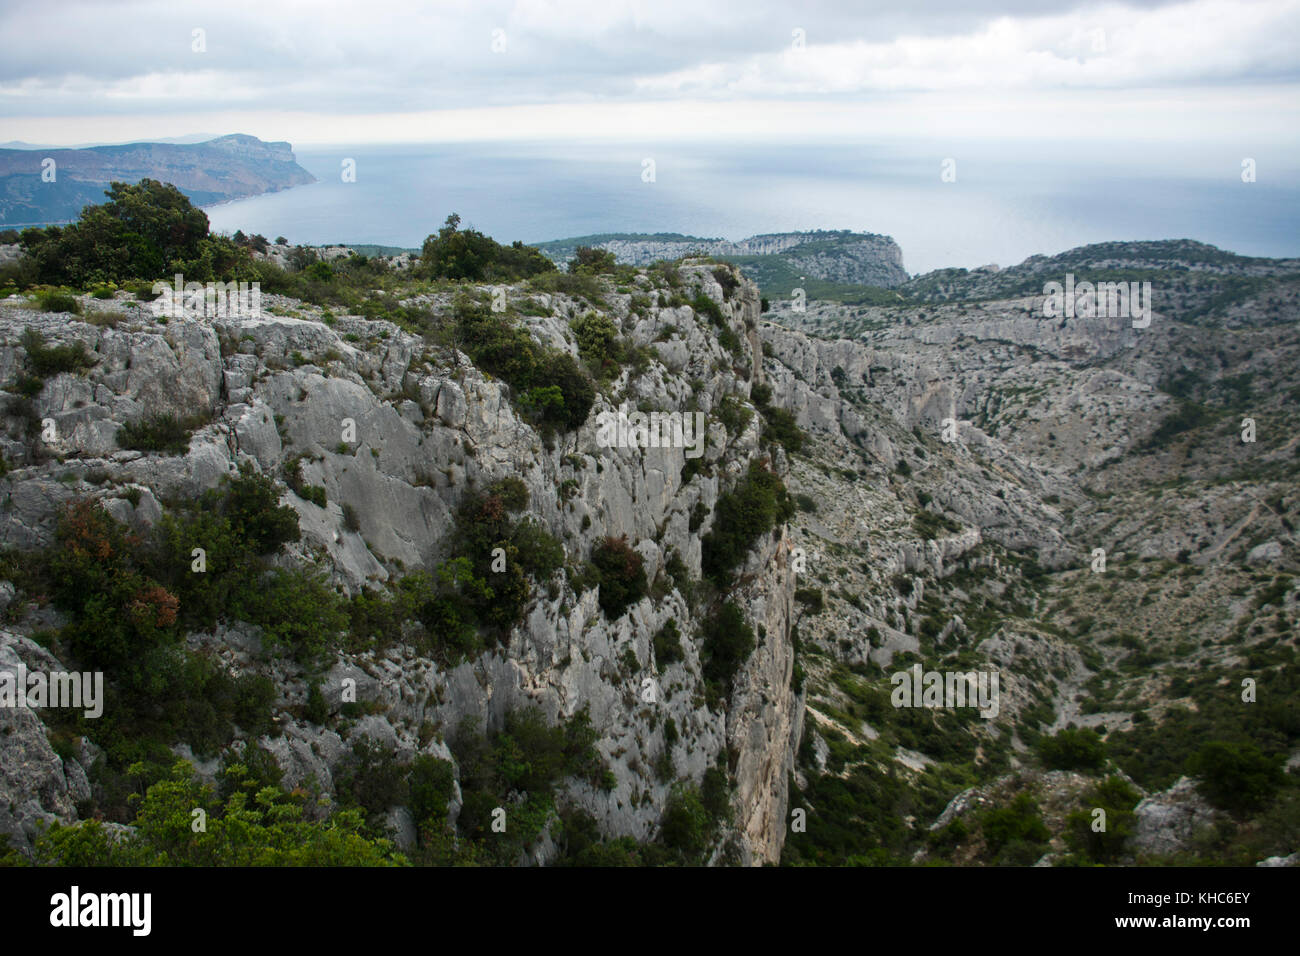 View from Cap Gros in Calanques *** Local Caption *** France, Sud, Provence, Calanques, National Park, cliffs, rocks, view, Cap Gros, sea, Mediterrane Stock Photo